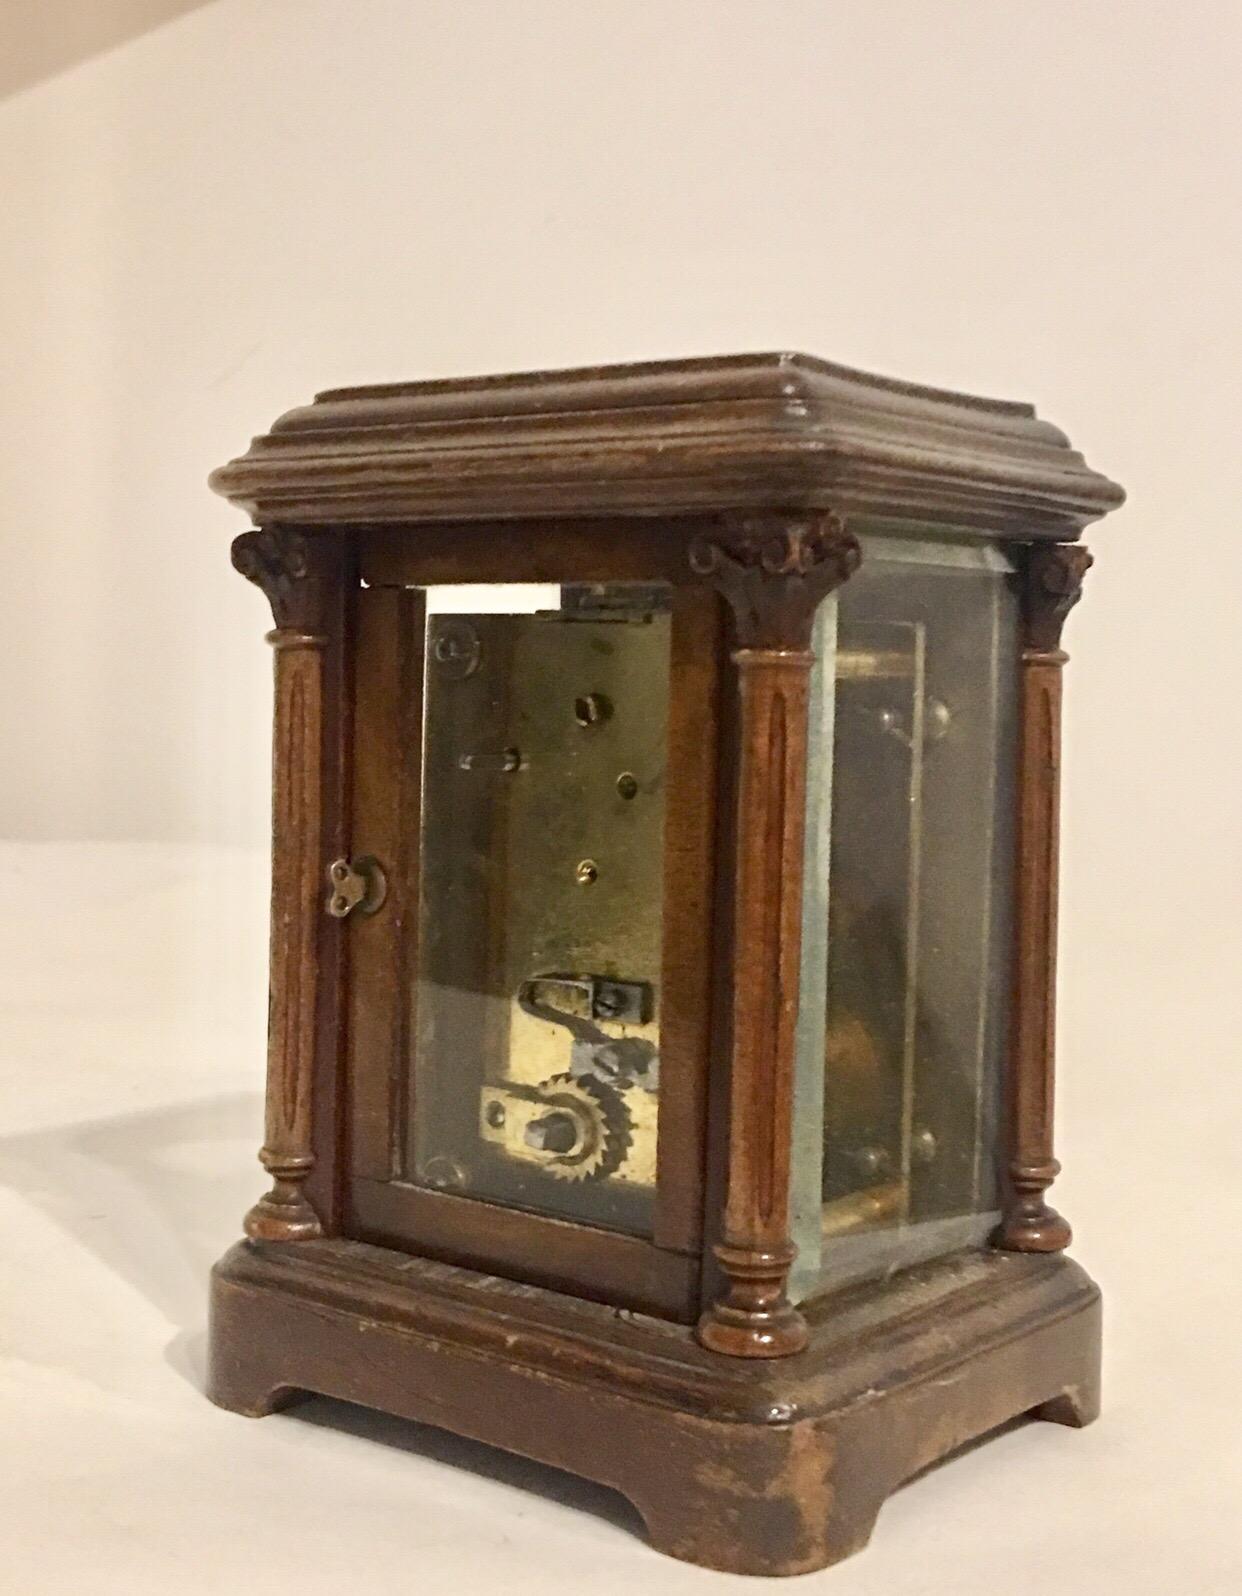 Rare Antique Timepiece Wooden Mantel / Carriage Clock In Fair Condition For Sale In London, Nottinghill